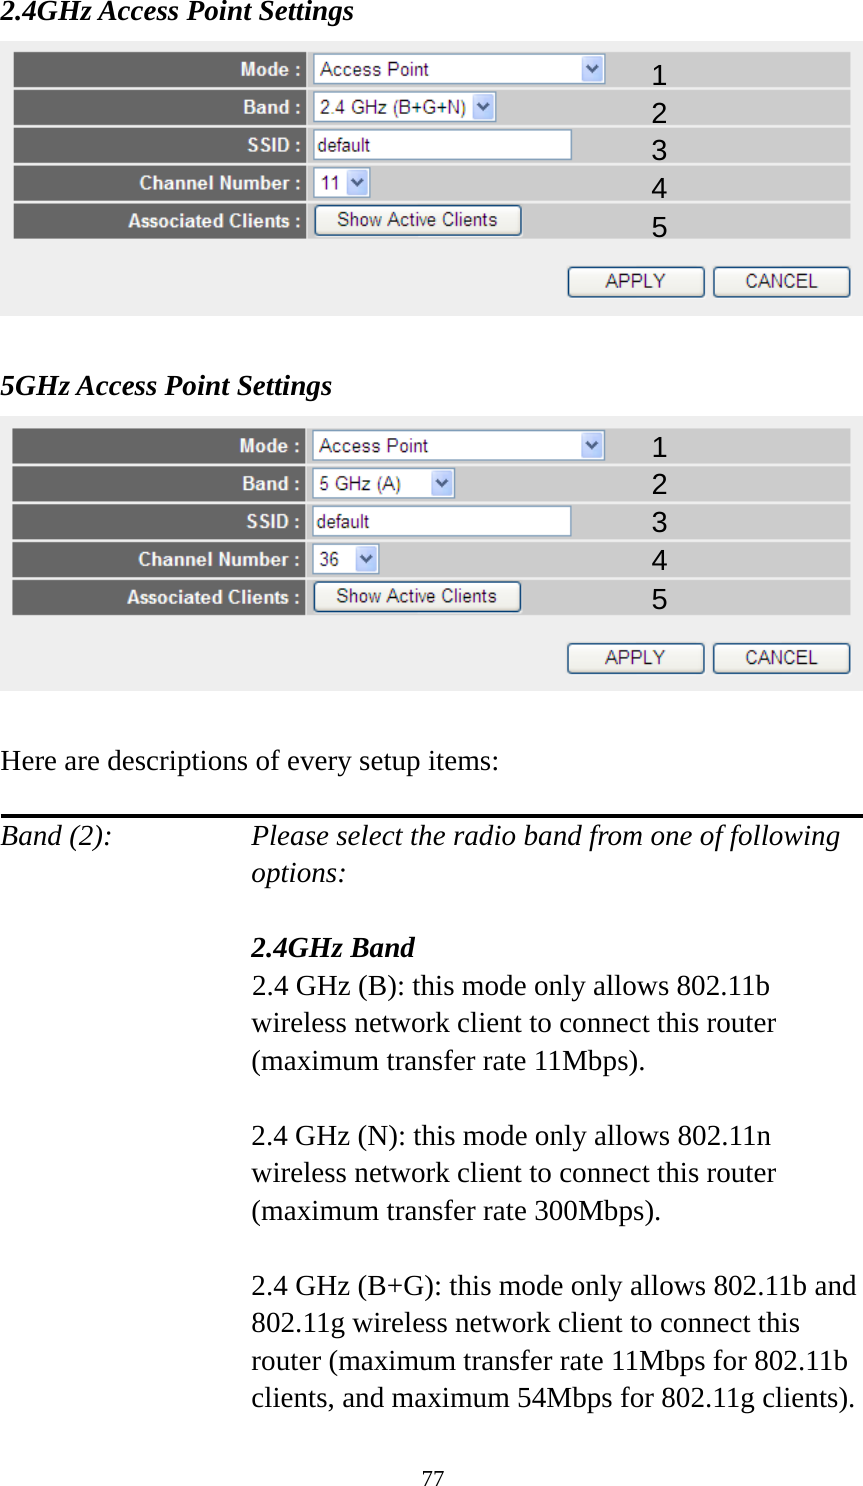 77 2.4GHz Access Point Settings   5GHz Access Point Settings   Here are descriptions of every setup items:  Band (2):    Please select the radio band from one of following options:    2.4GHz Band 2.4 GHz (B): this mode only allows 802.11b wireless network client to connect this router (maximum transfer rate 11Mbps).  2.4 GHz (N): this mode only allows 802.11n wireless network client to connect this router (maximum transfer rate 300Mbps).  2.4 GHz (B+G): this mode only allows 802.11b and 802.11g wireless network client to connect this router (maximum transfer rate 11Mbps for 802.11b clients, and maximum 54Mbps for 802.11g clients). 12 34 5 12 34 5 